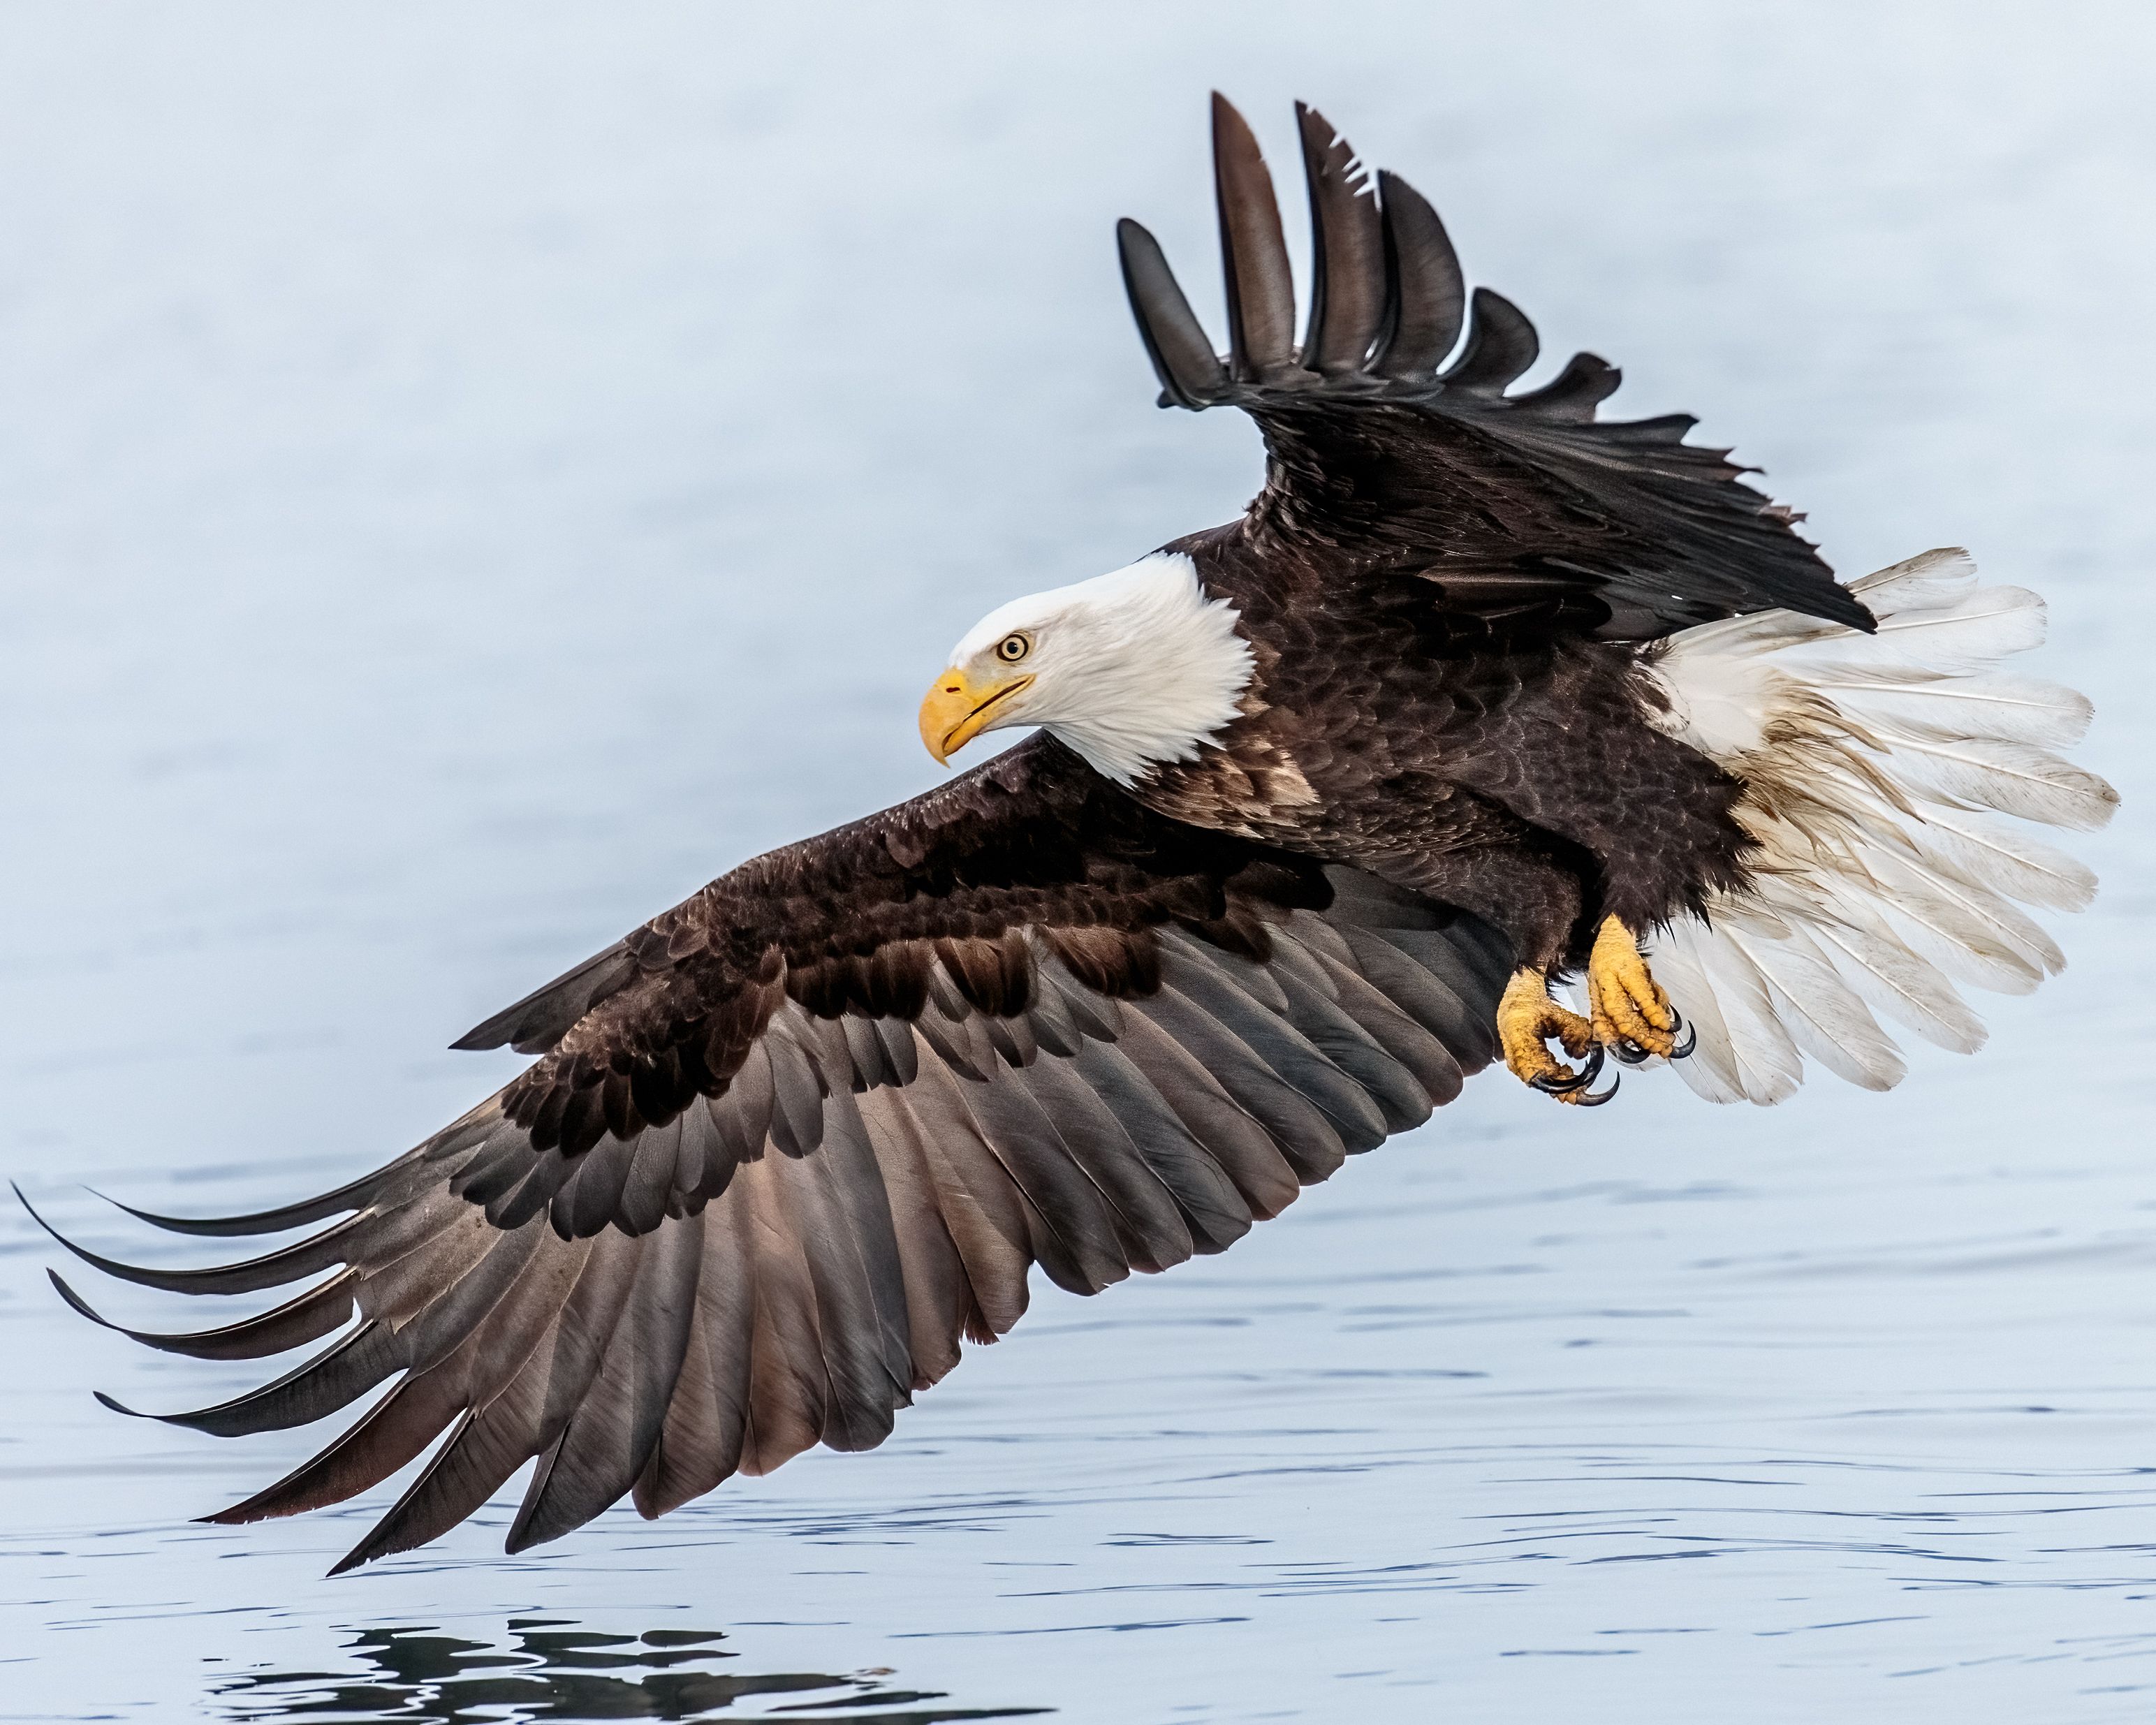 A Bald Eagle takes flight over water.